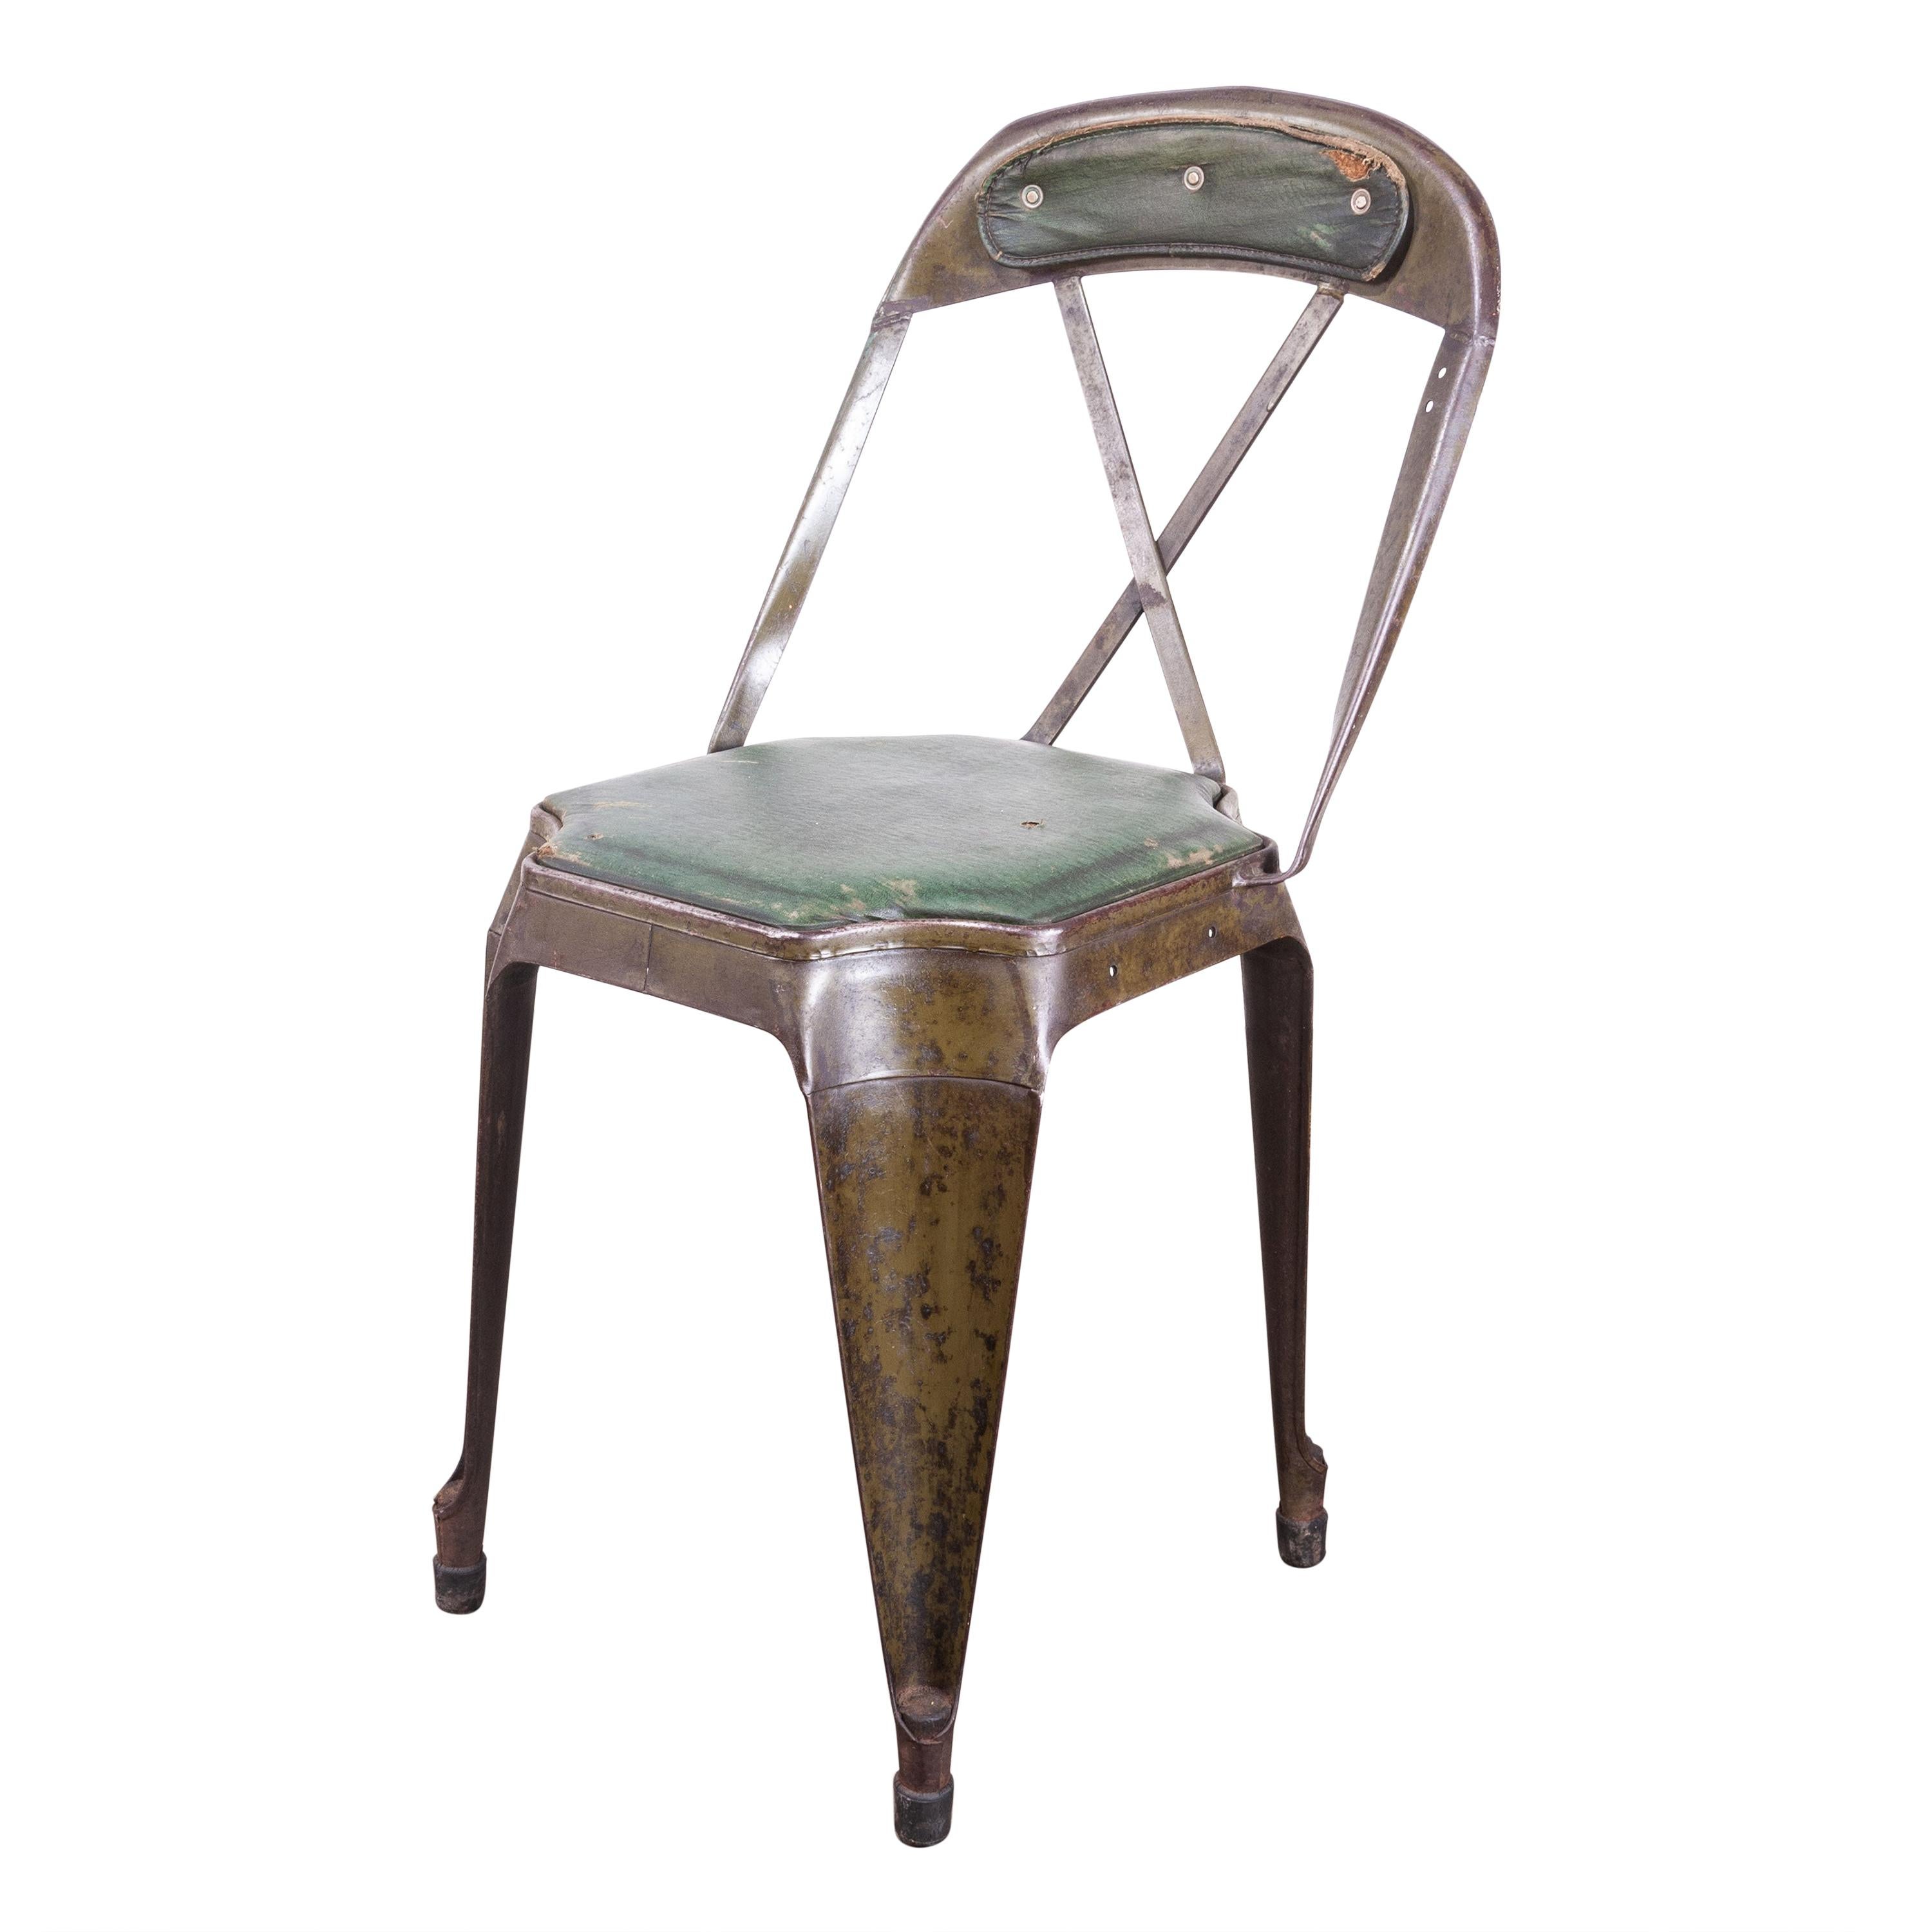 1930s Evertaut Cross Back Dining Chair